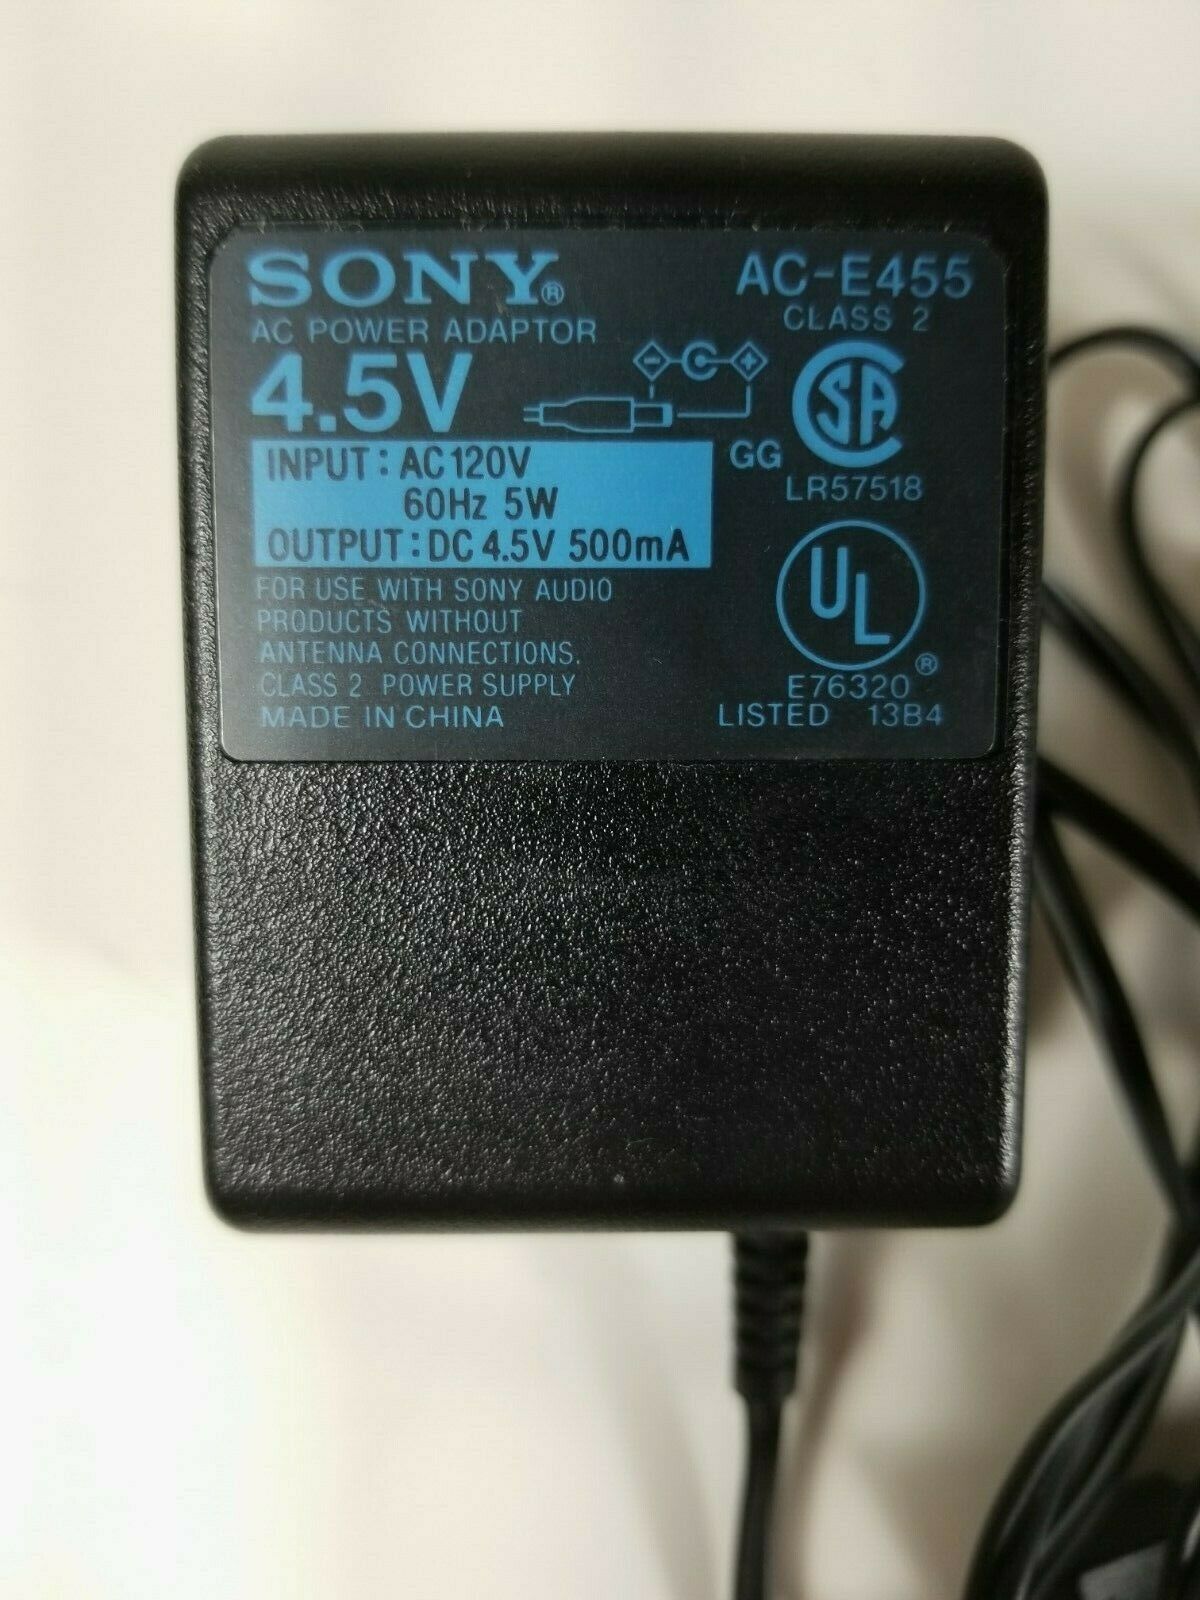 NEW Sony AC-E455A AC-E455 Adapter Power Supply DC 4.5 Volt 500mA for CD Player Dis